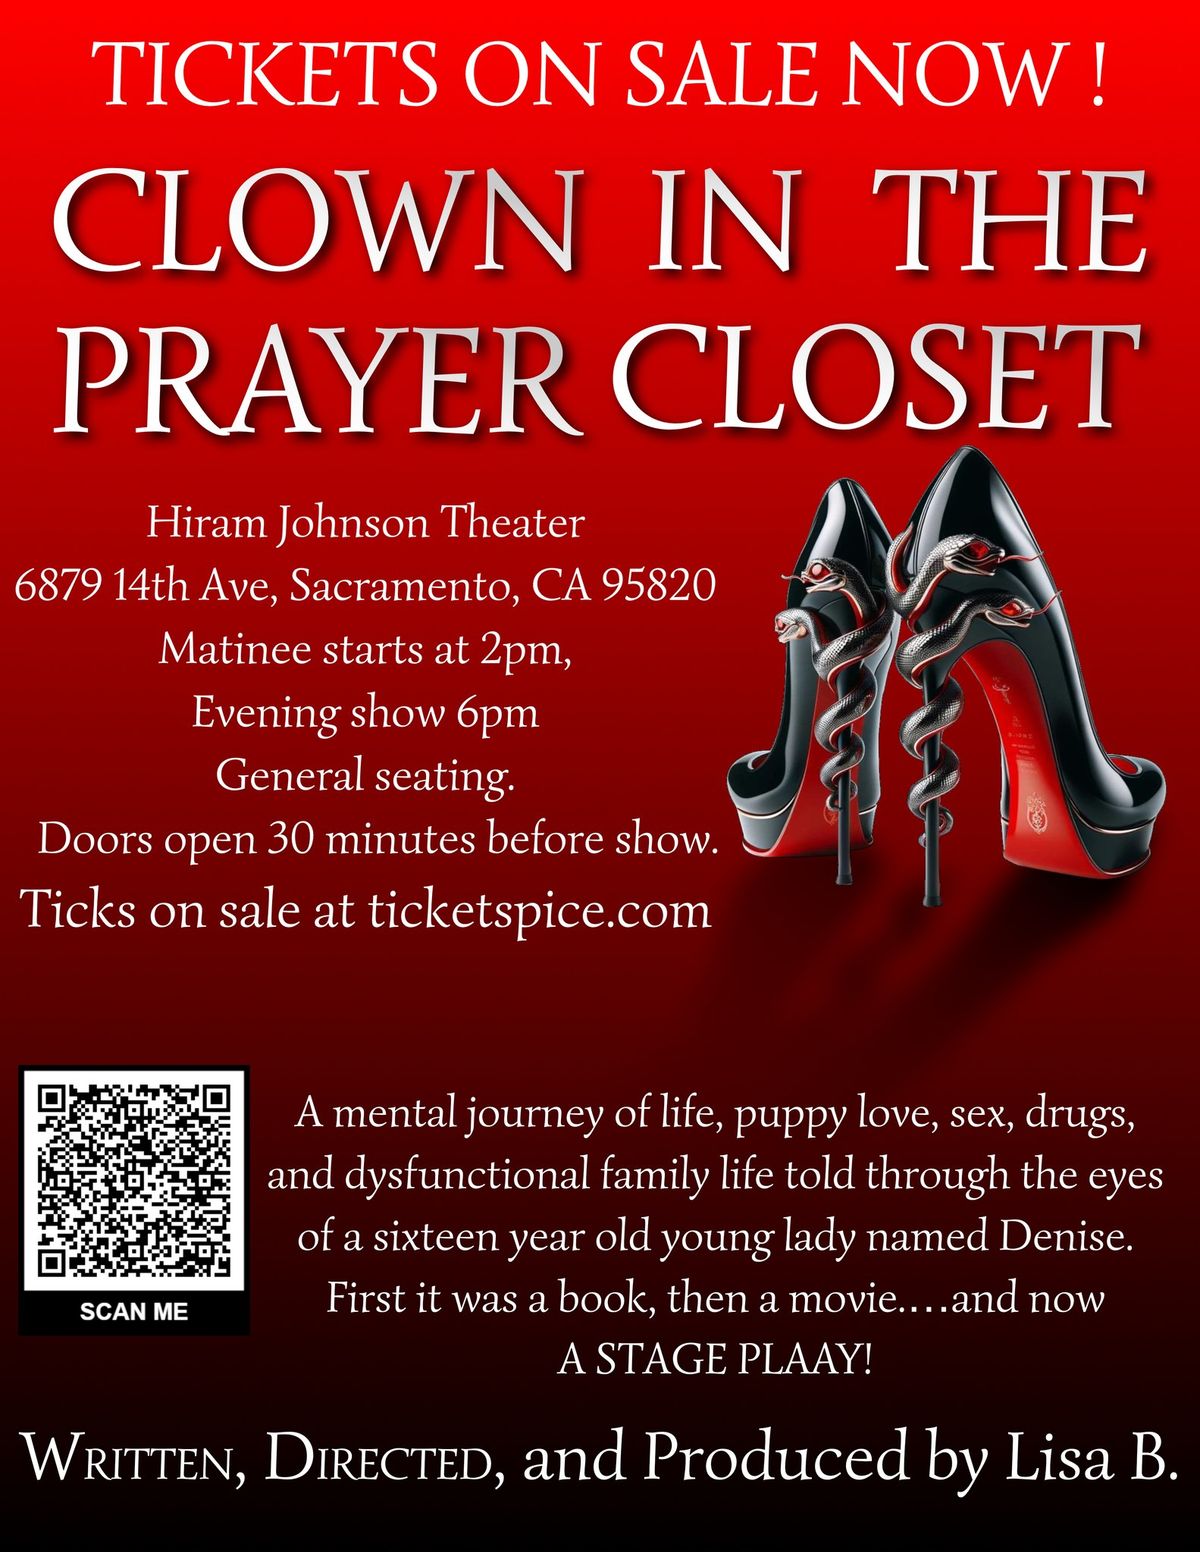 Clown in the Prayer Closet, the stage play